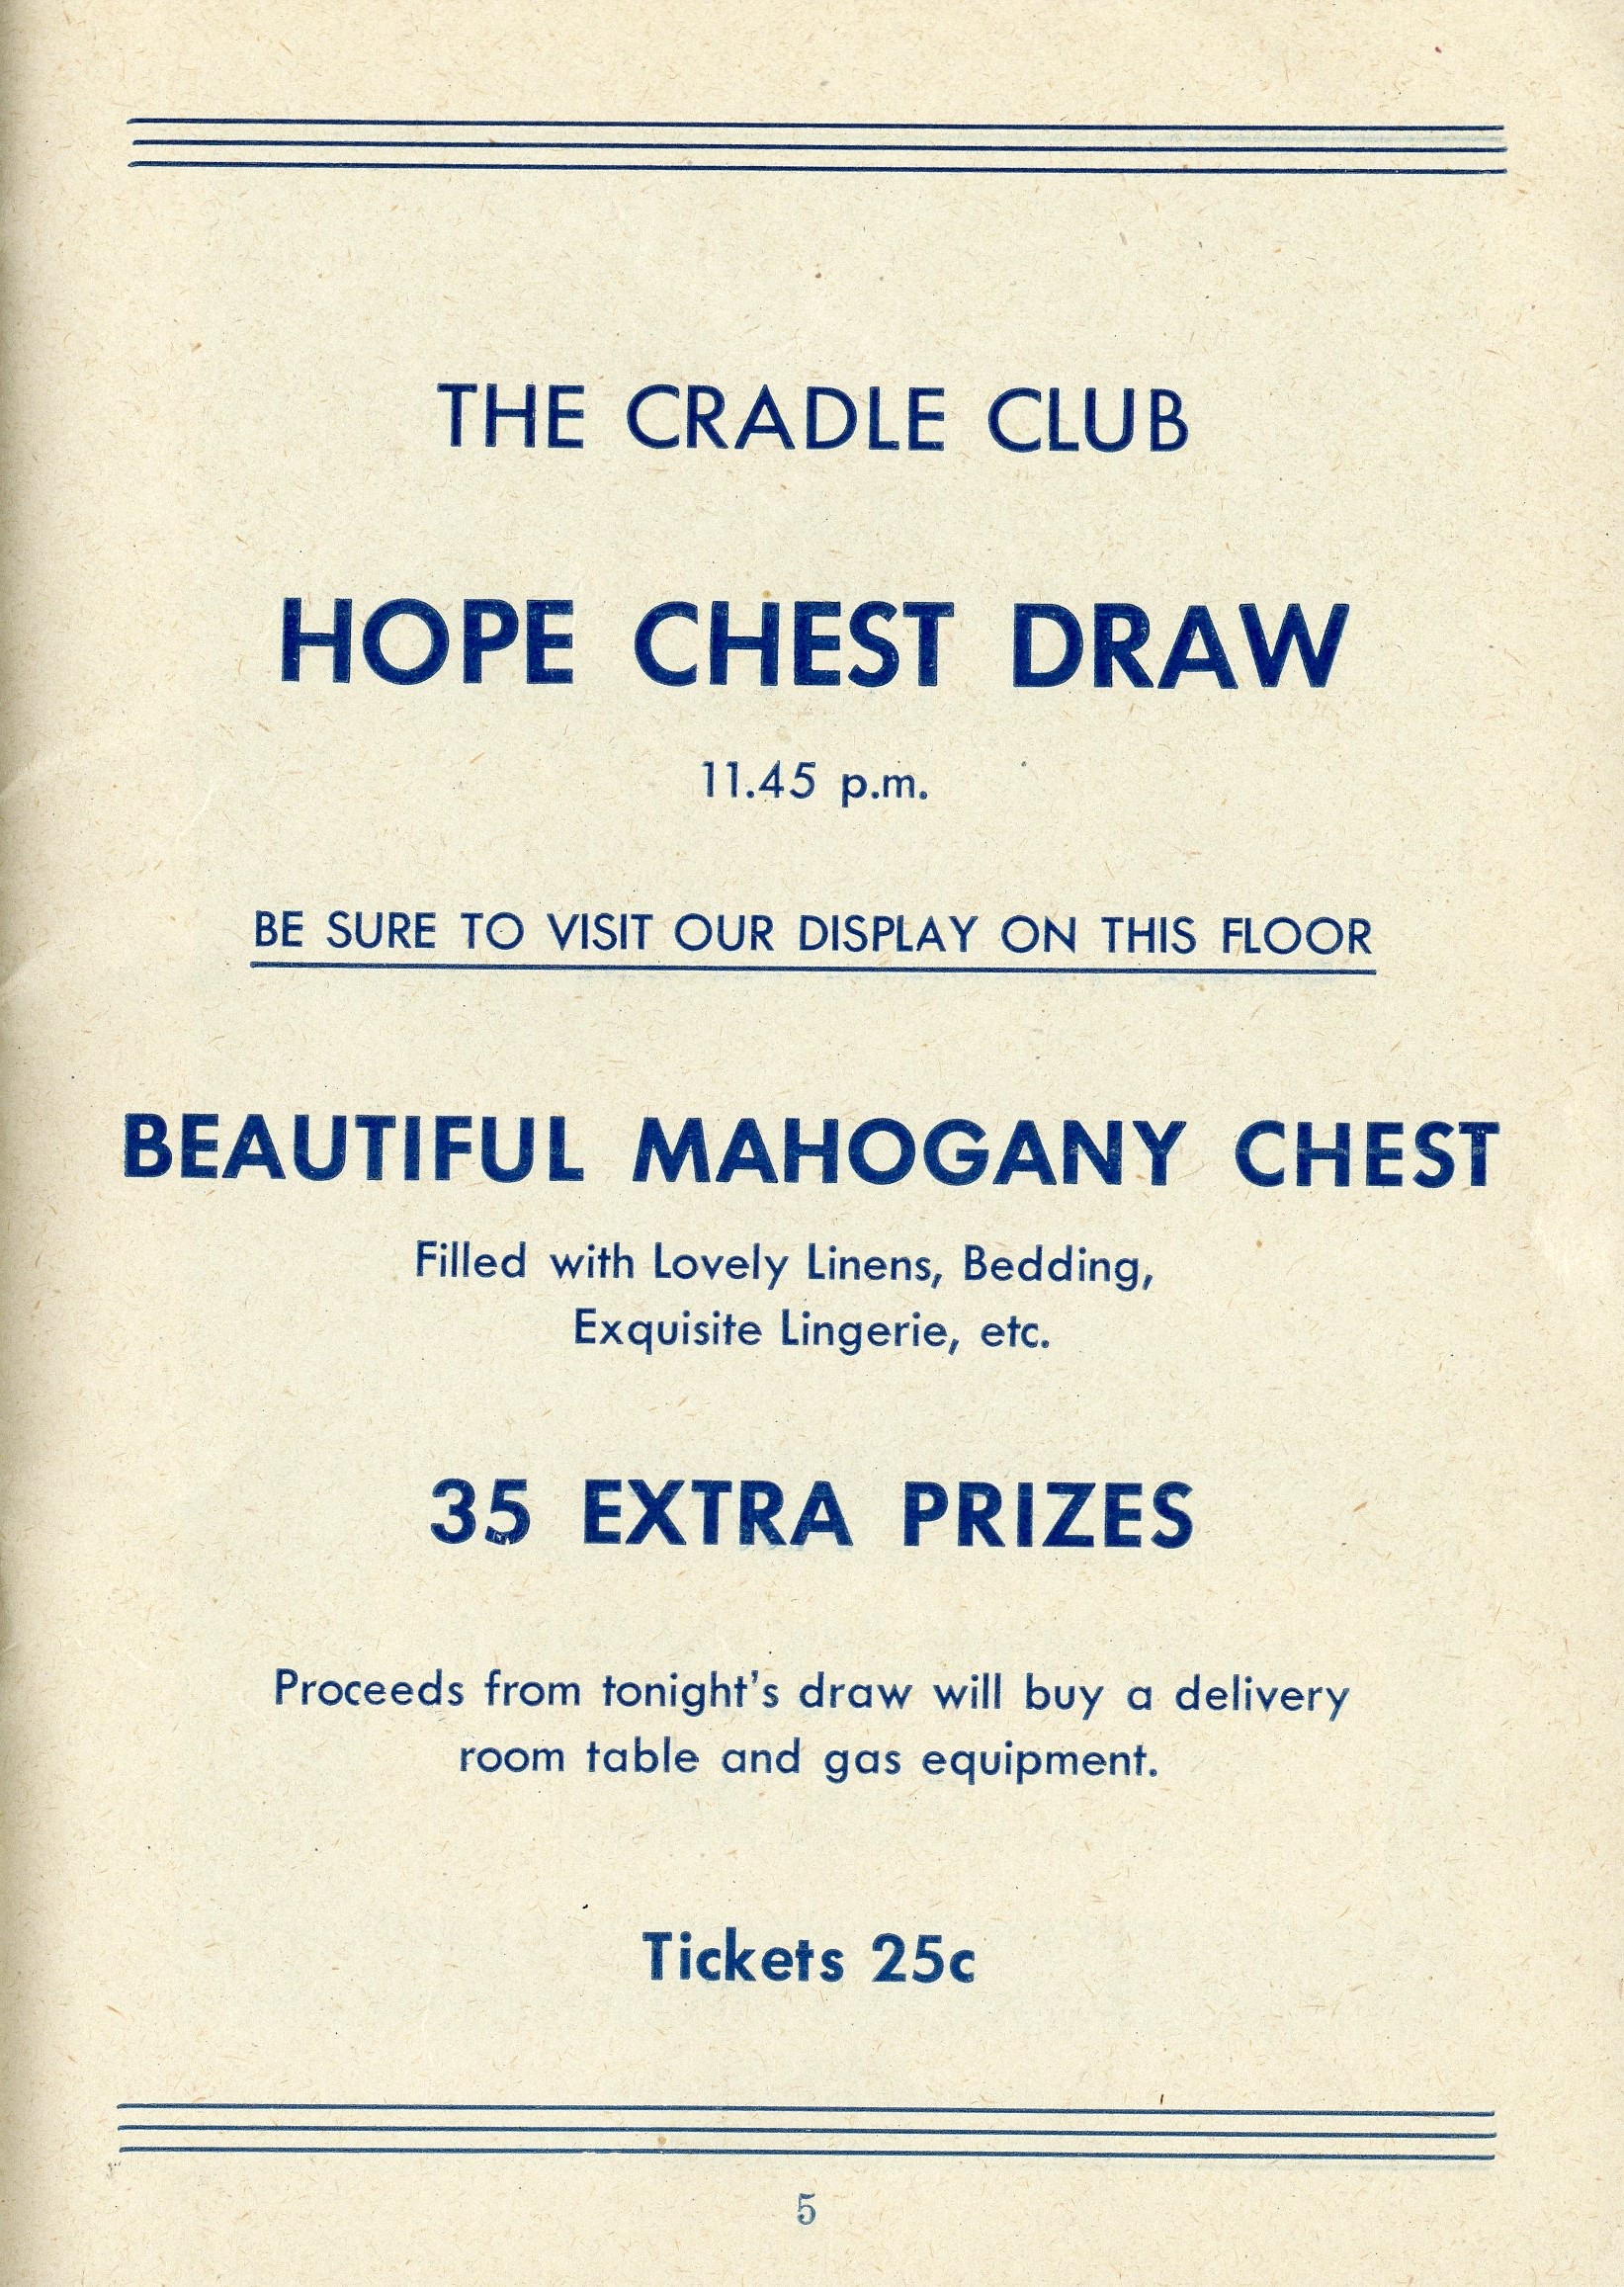 Announcement for the Cradle Club's Hope Chest Draw, including a "beautiful mahogany chest."